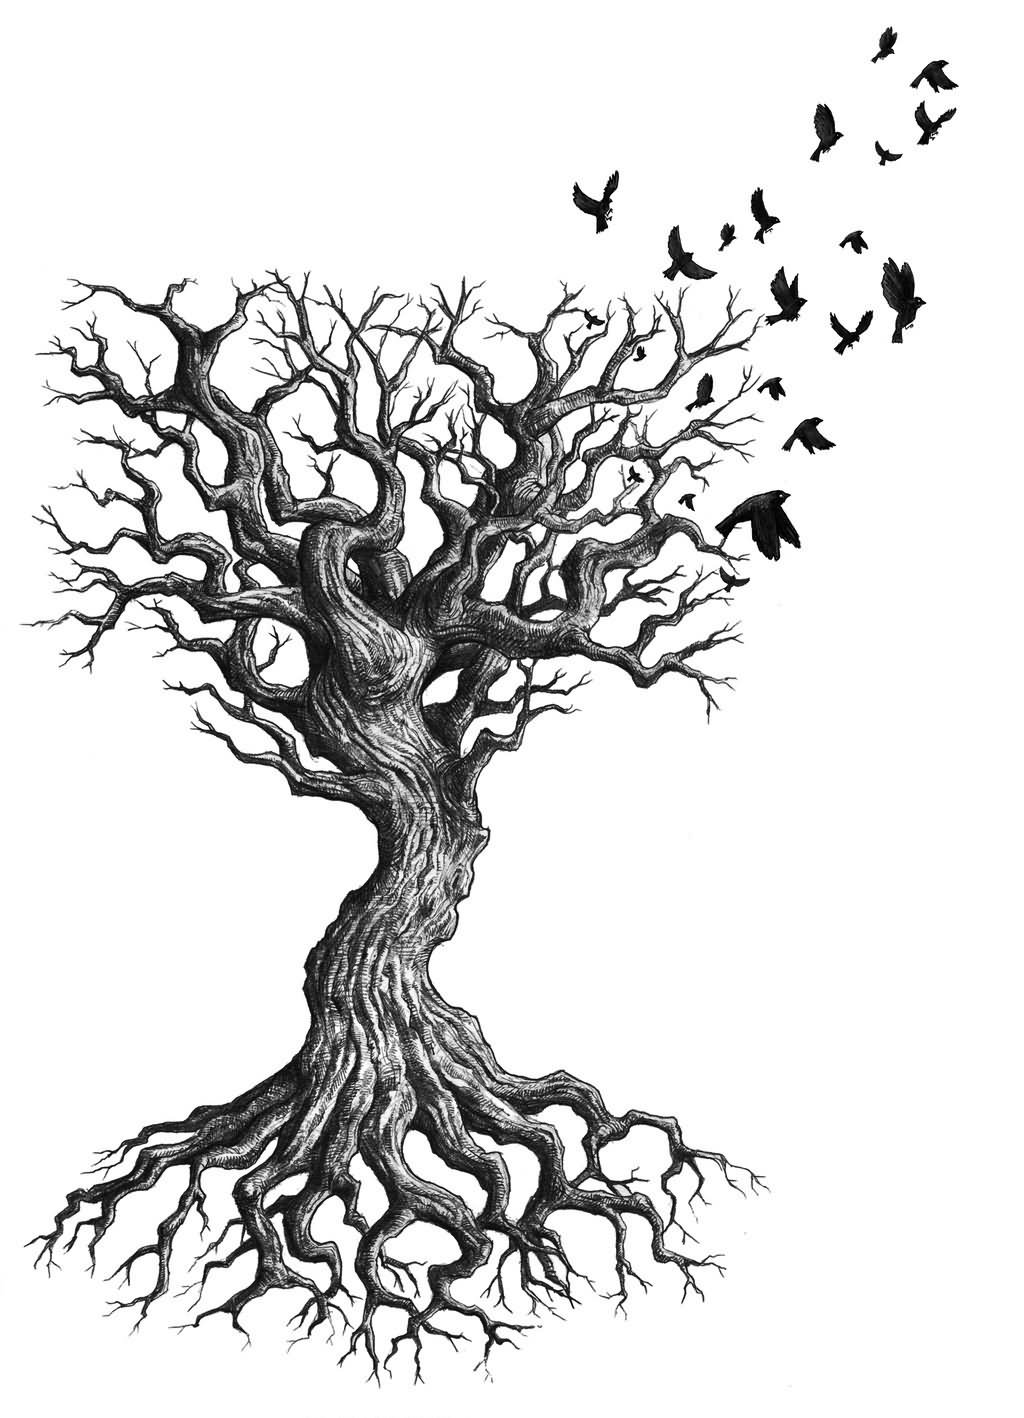 Black And Grey Without Leaves Tree With Flying Birds Tattoo Design